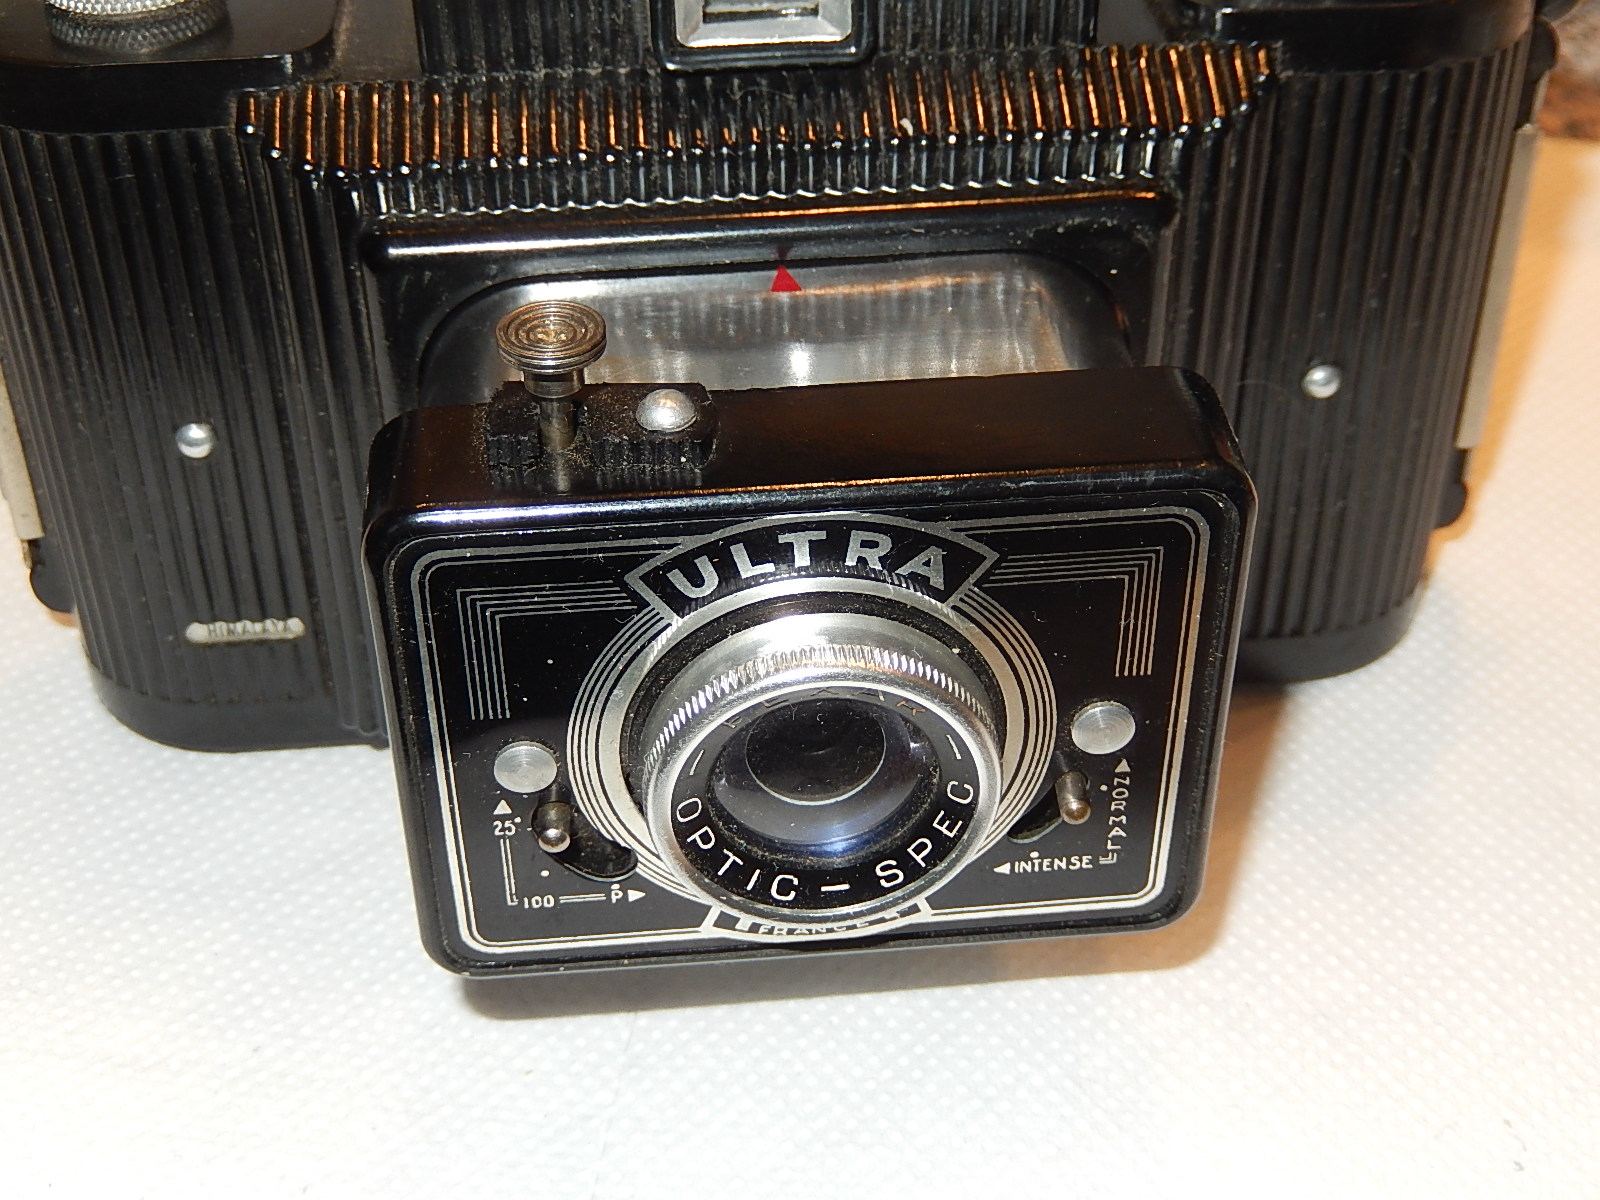 ANTIQUE CAMERA FOR ULTRA FEX HIMALAYA